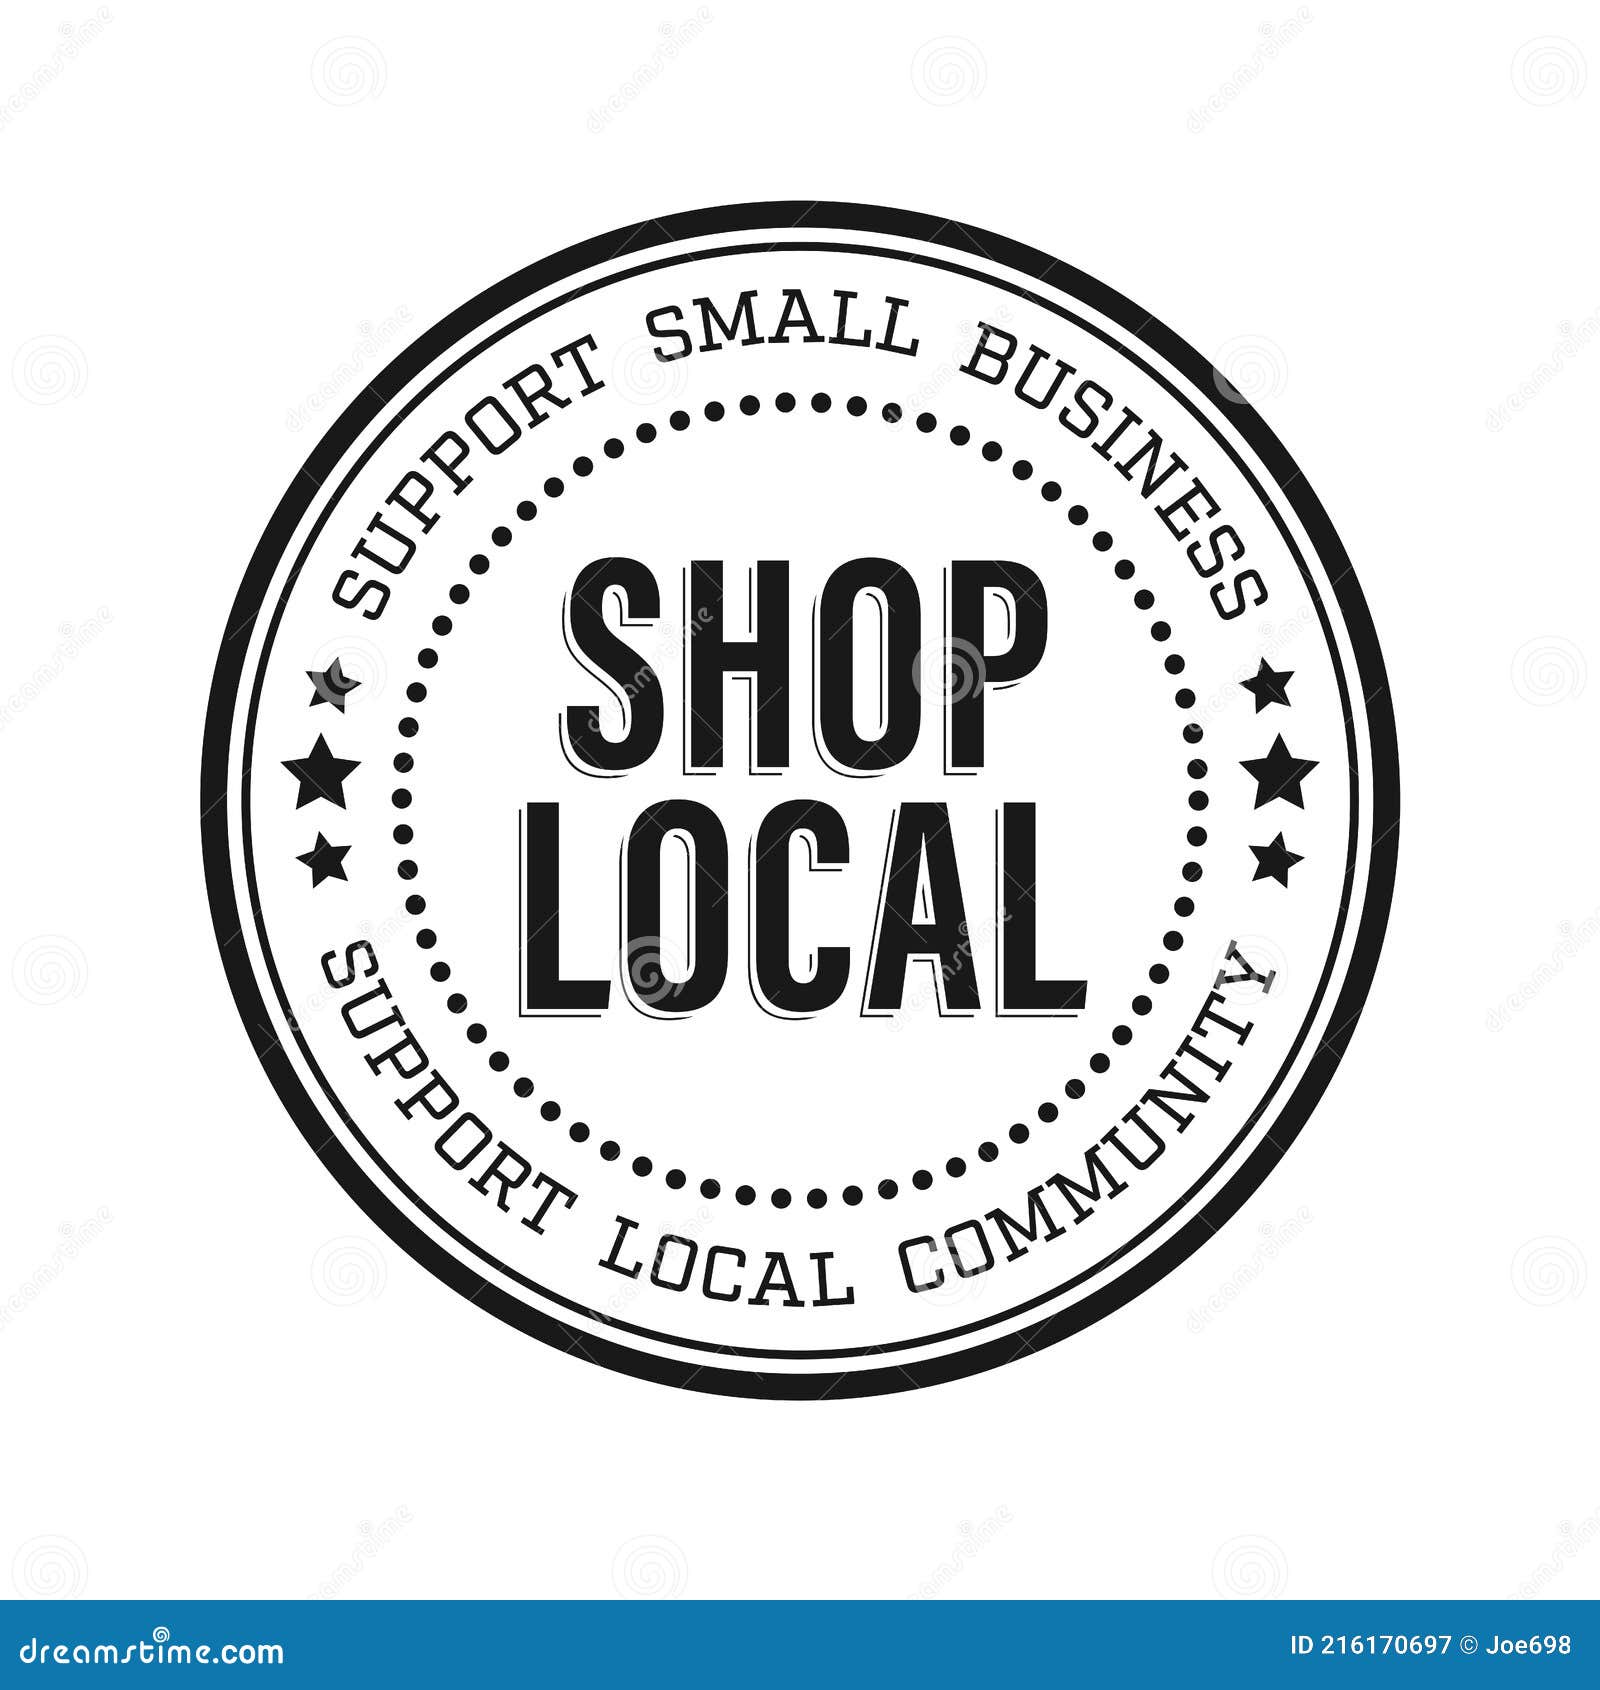 shop local small business logo icon - shop small - buy local - support community